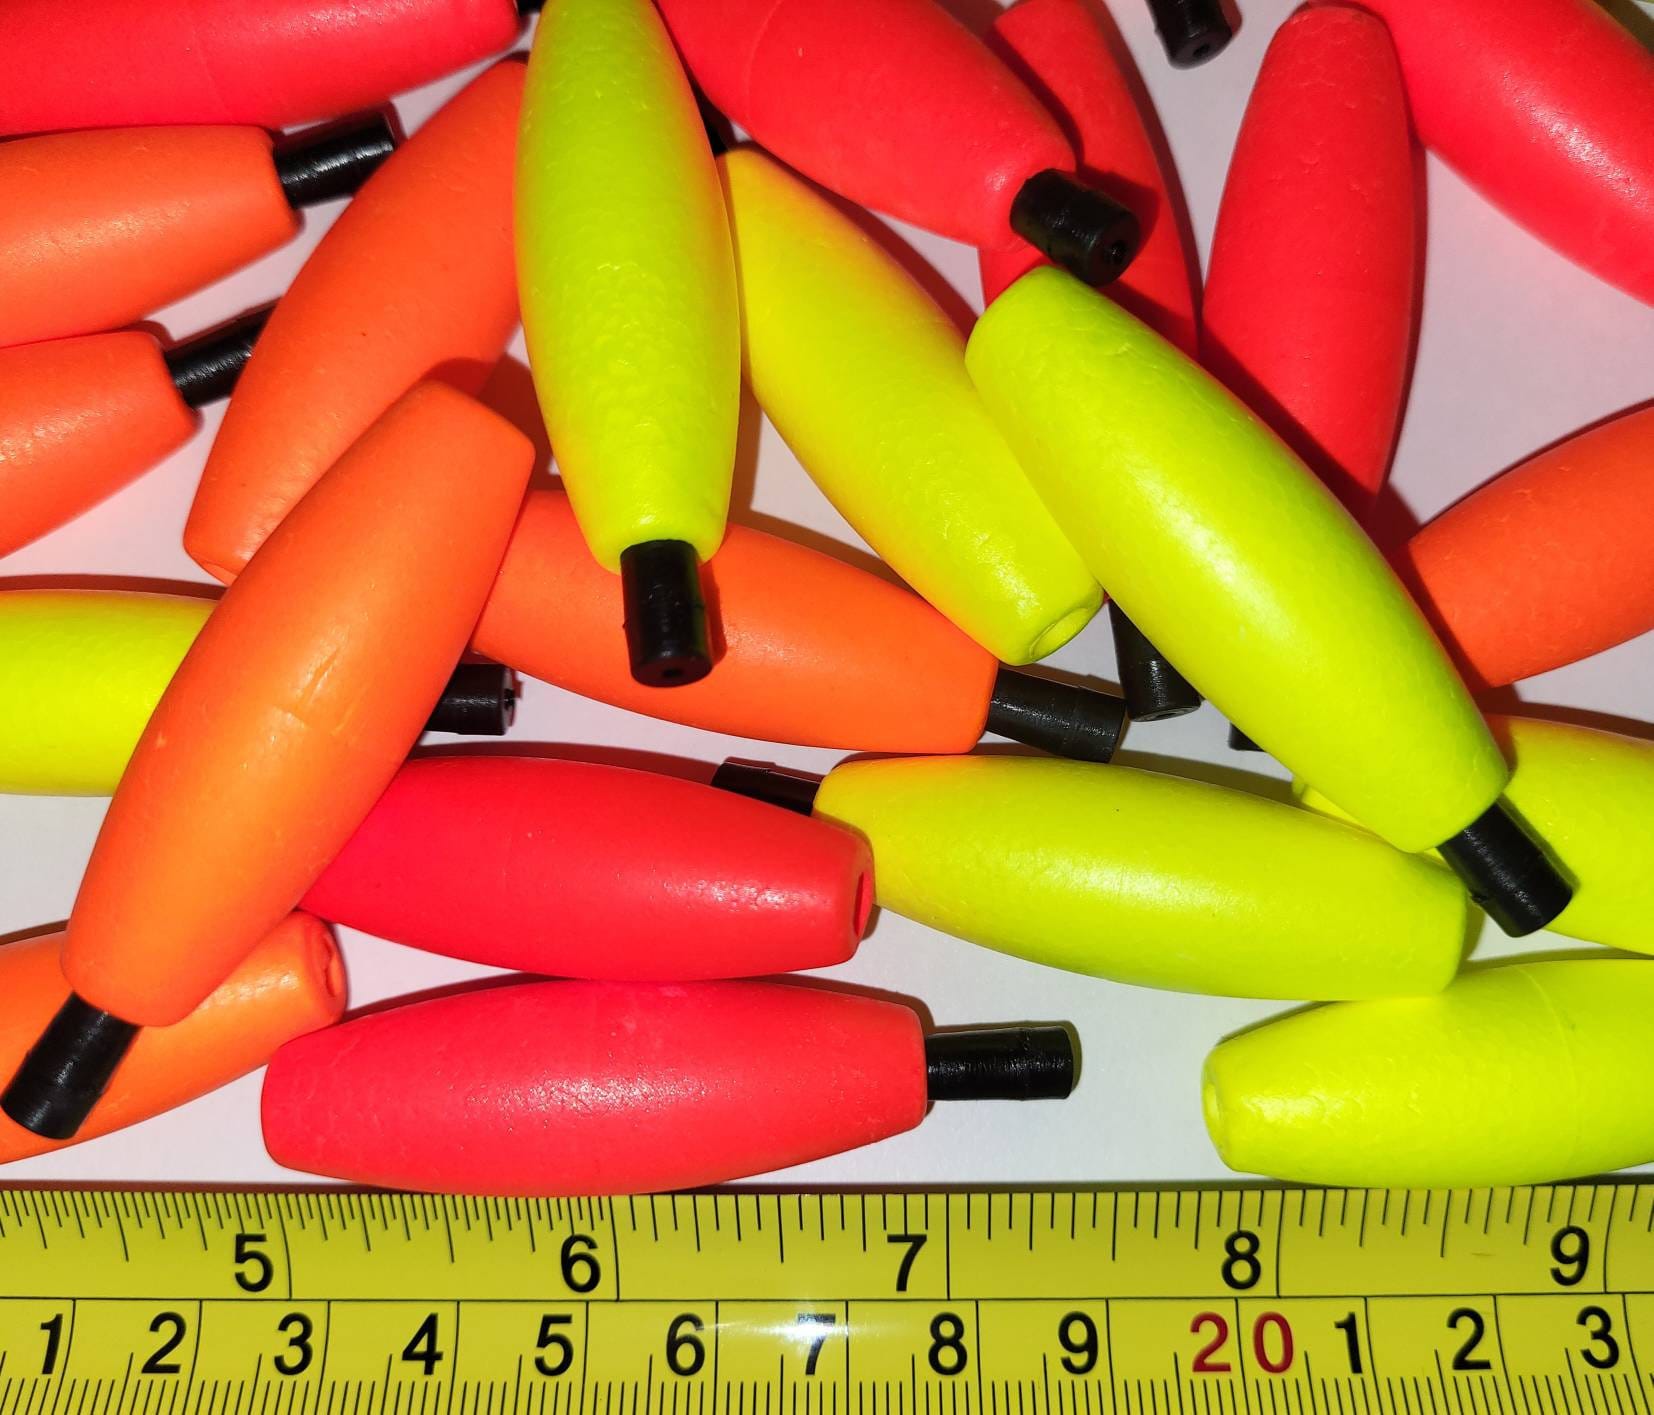 100 of the 2 Inch Styrofoam Cigar Shaped Peg Fishing Floats. 2, Wholesale,  Choose Bright Red, Bright Orange, Bright Yellow or Assorted. 